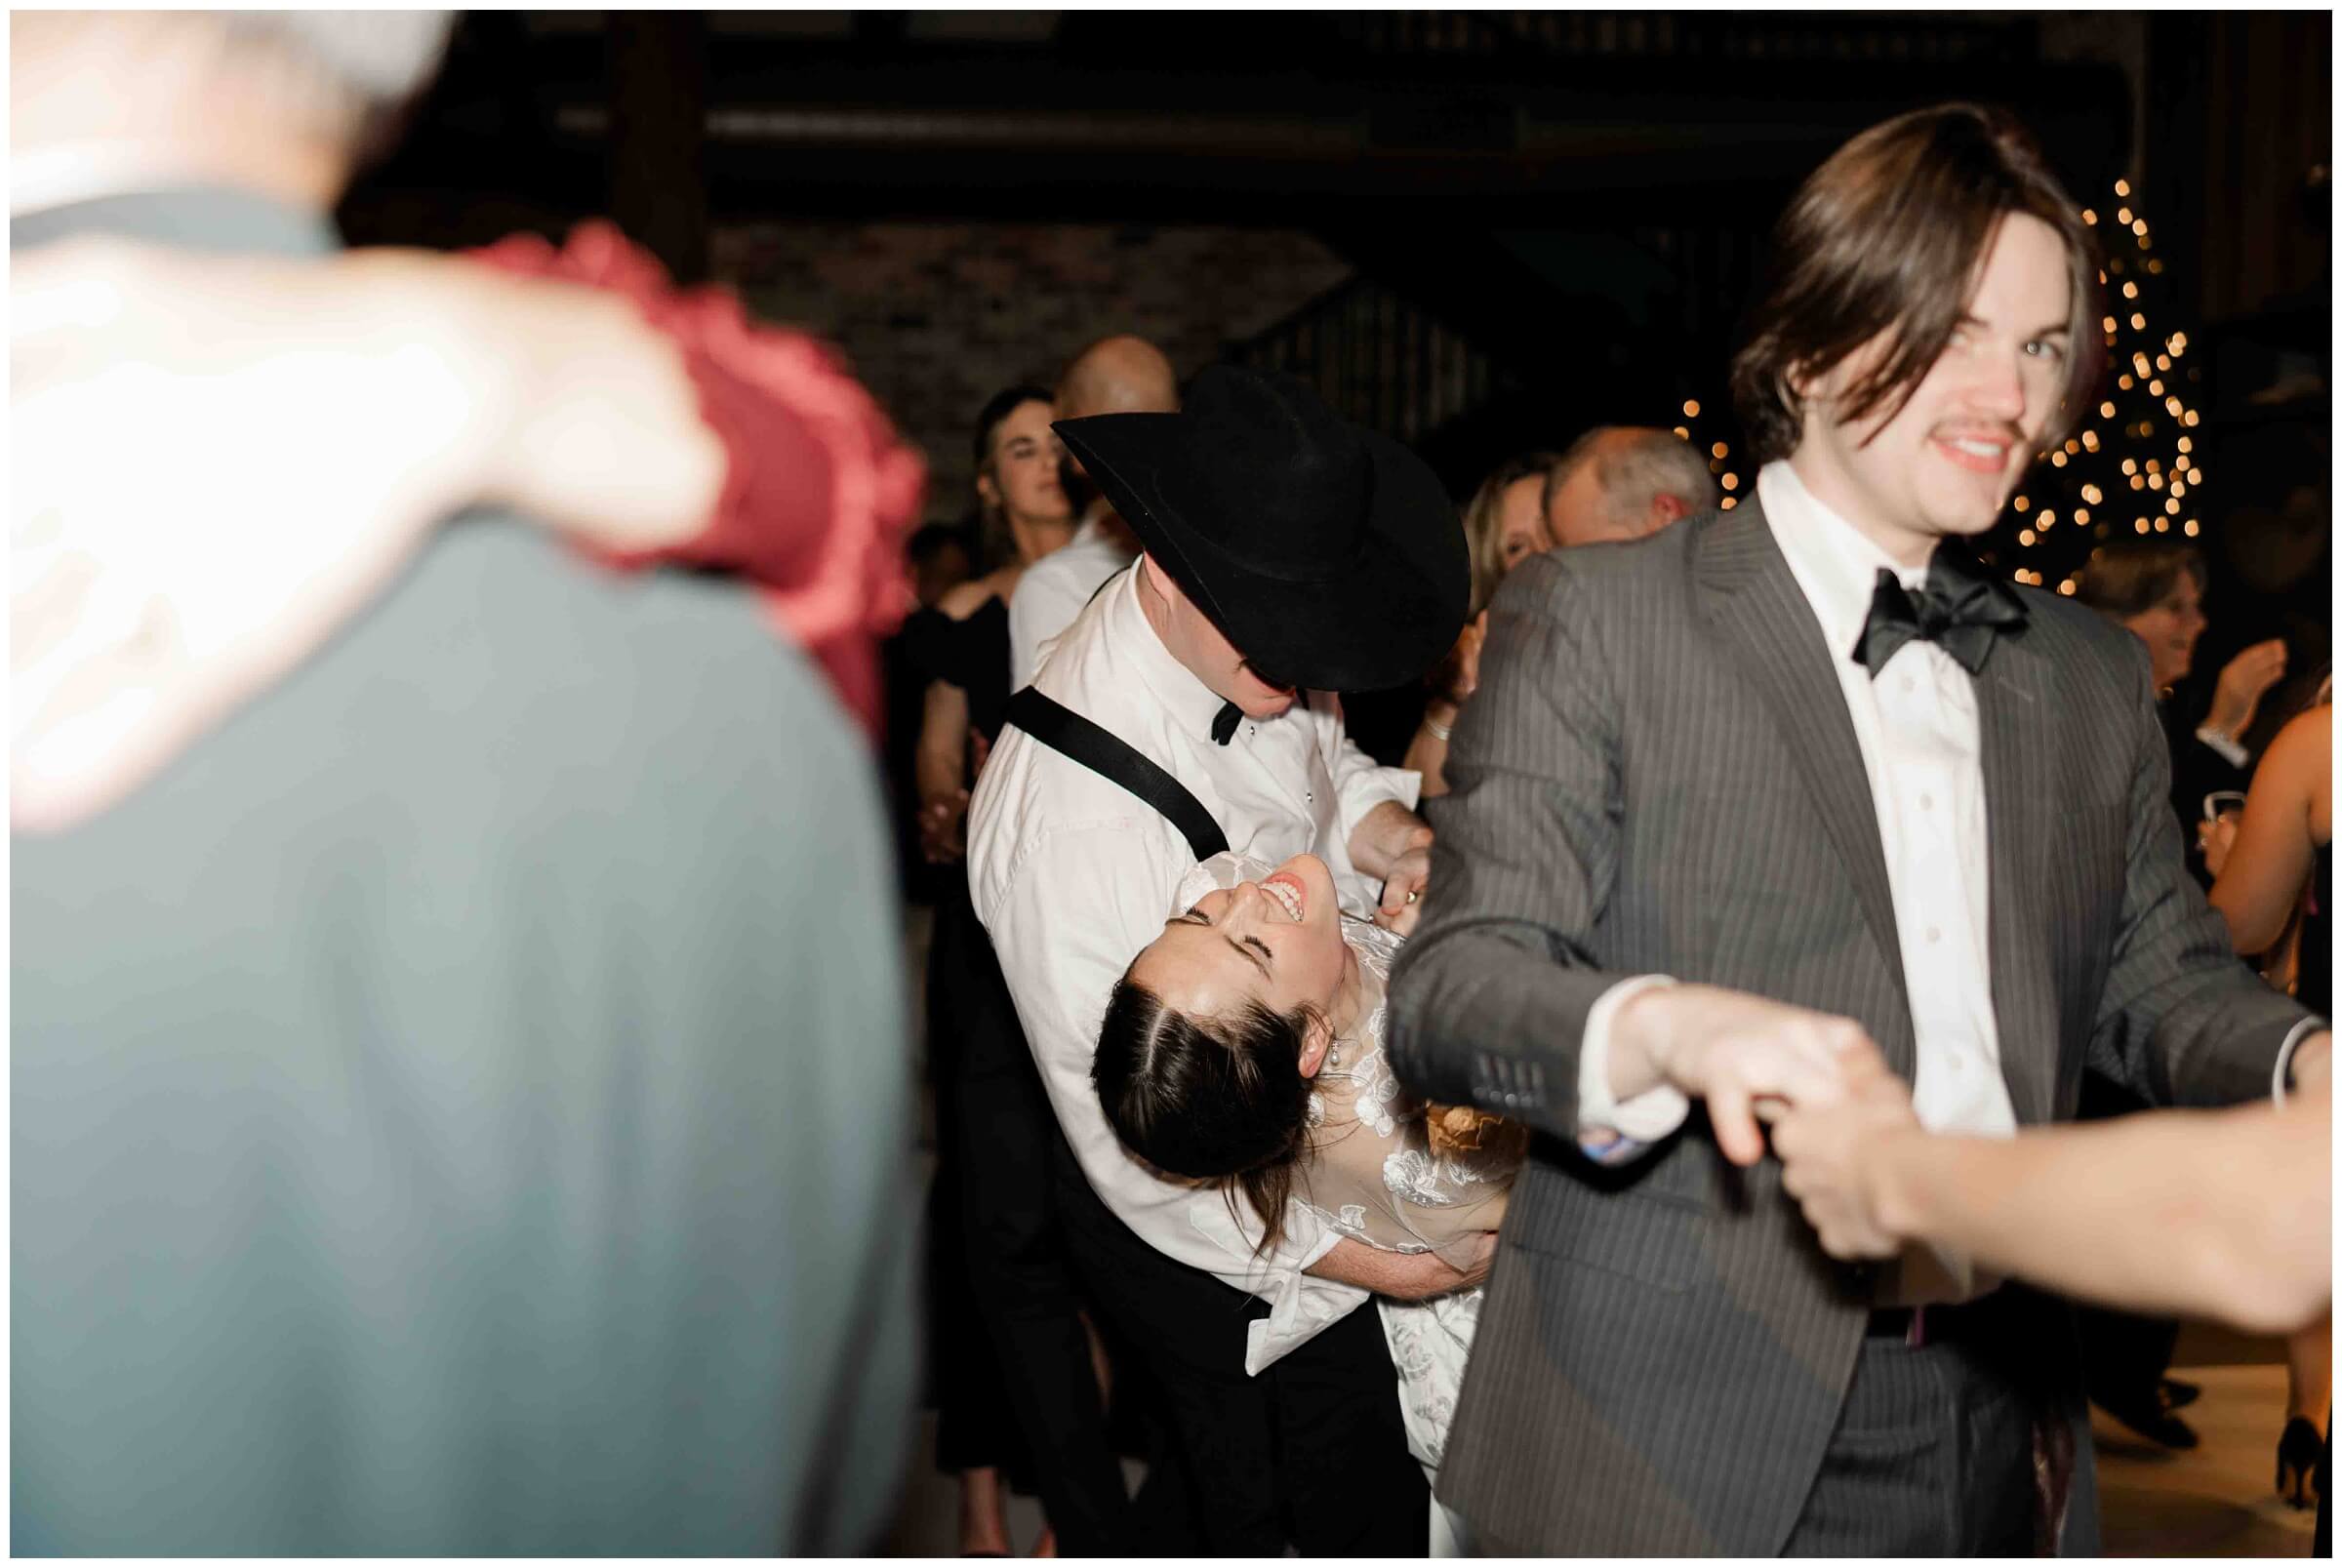 Guests dance at the wedding reception